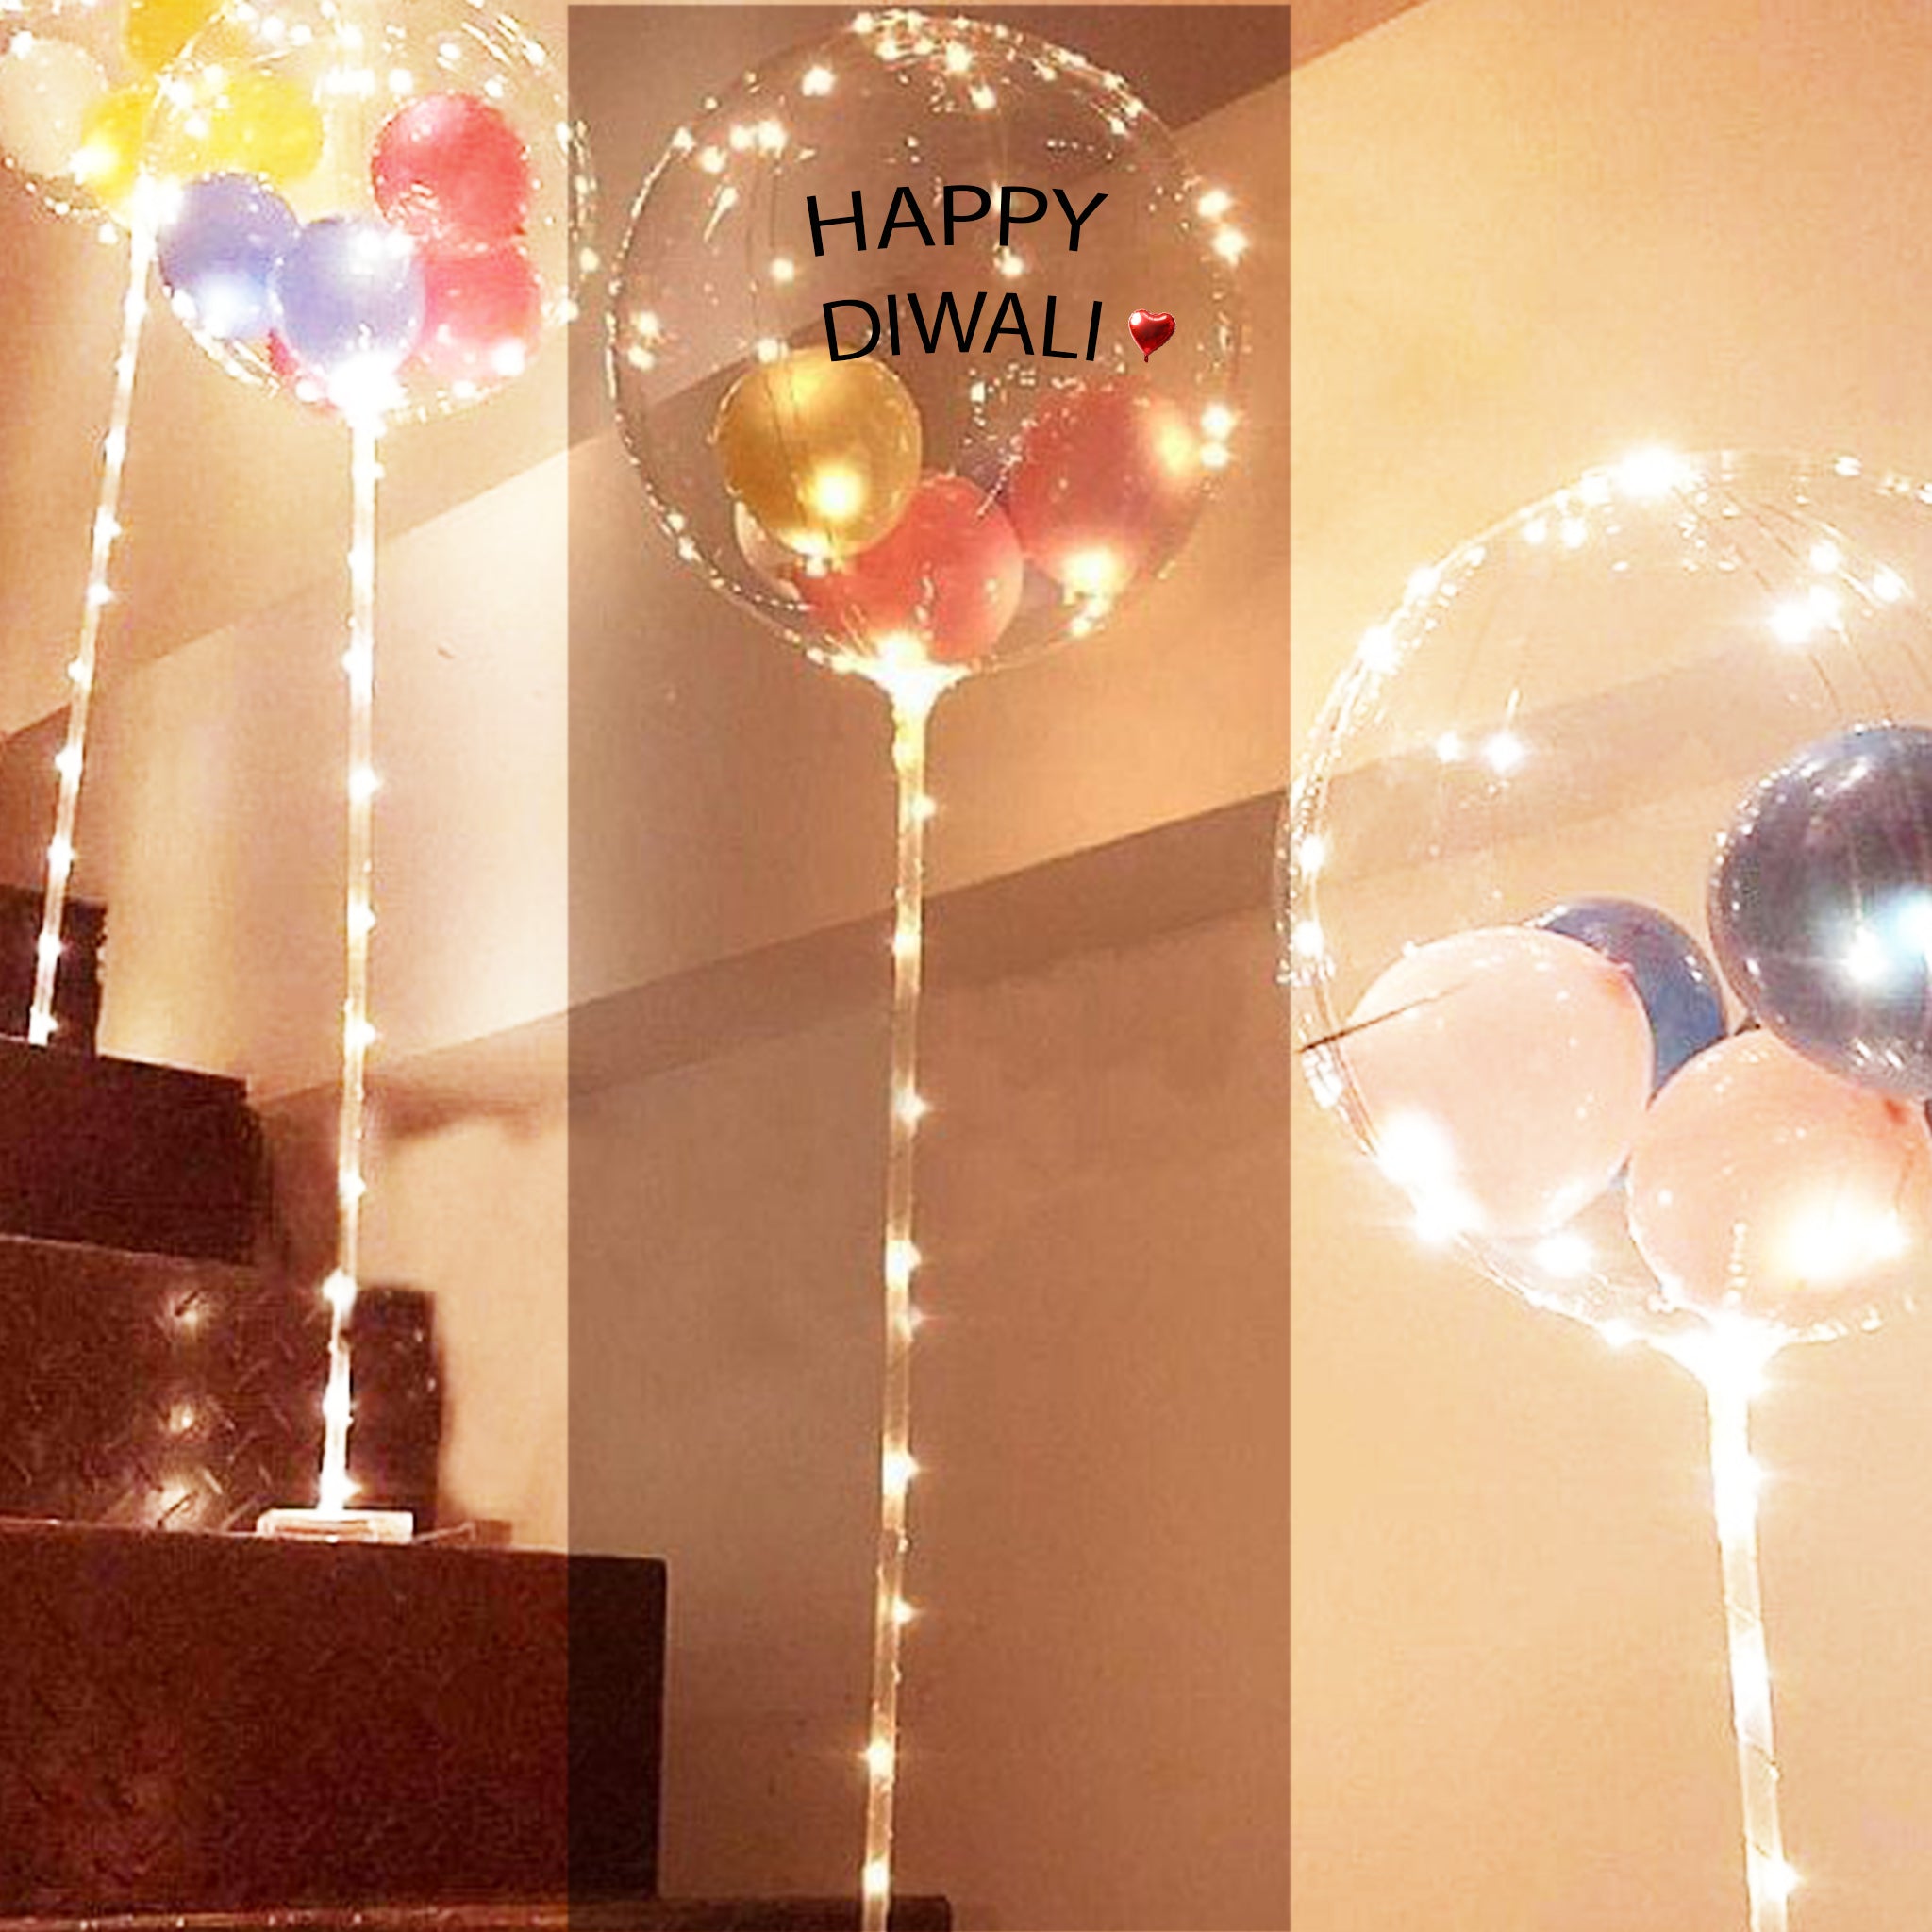 Diwali Party Games for Kids and Adults - Untumble.com